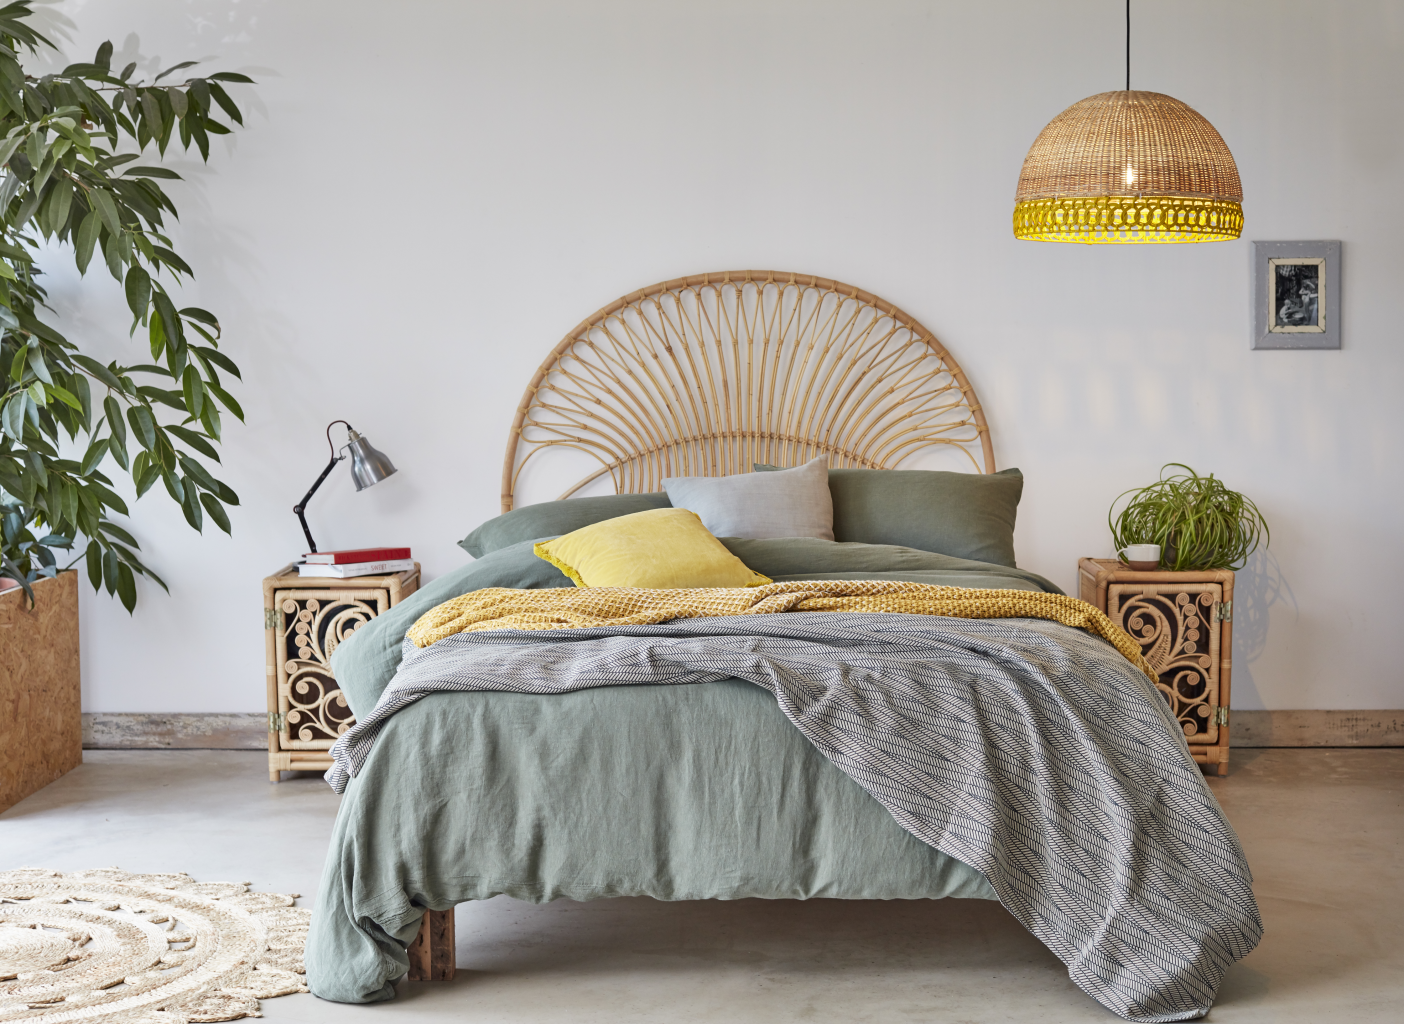 Natural Rattan Peacock Bedside Cabinets with Bali Headboard and Sarah Lampshade - The Rattan Company